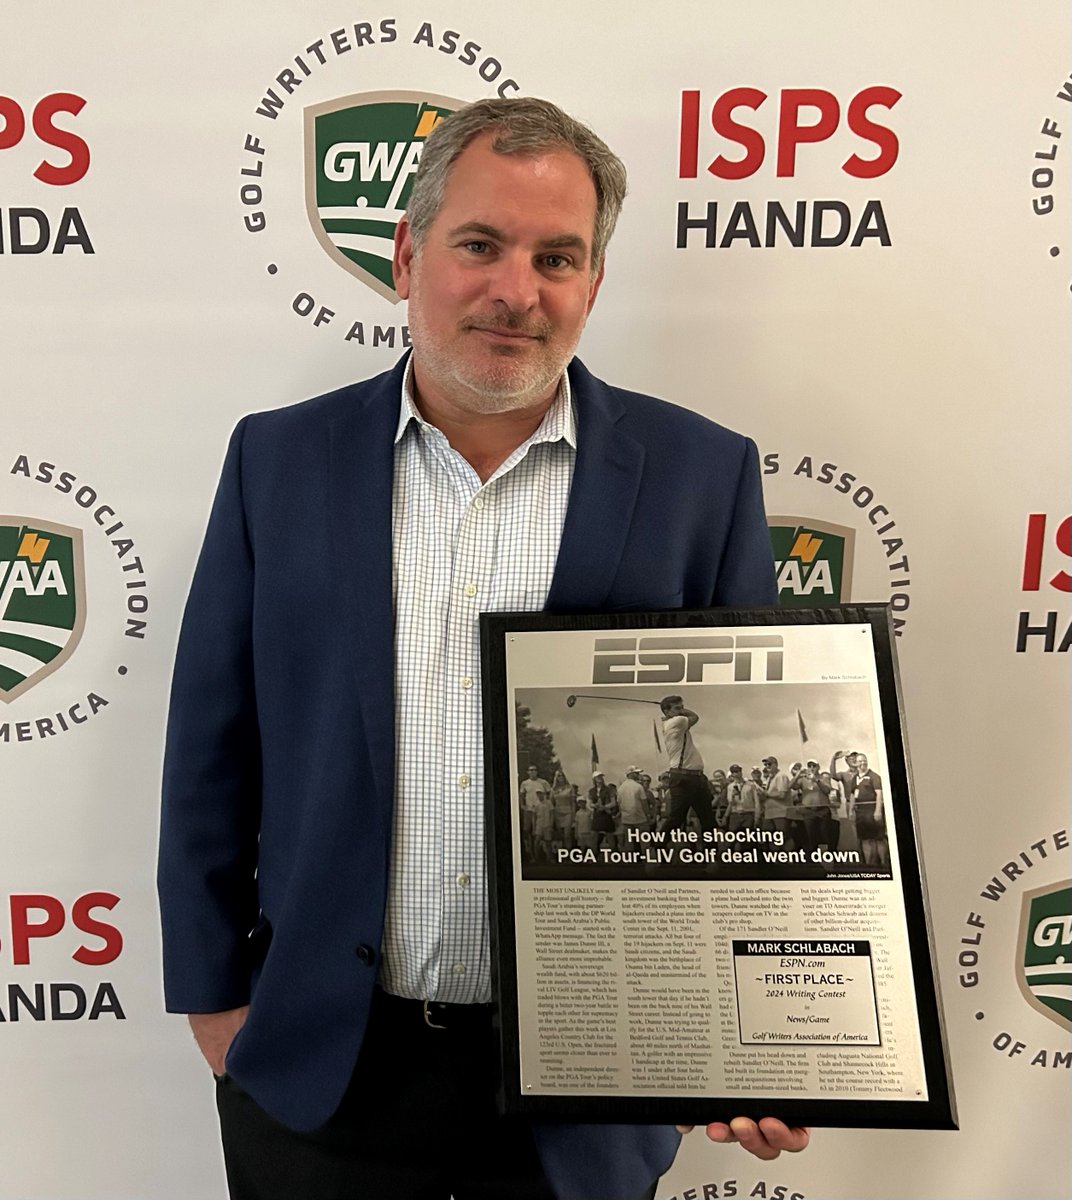 Congrats to ESPN sr. writer Mark Schlabach on being honored by the Golf Writers Association of America (@gwaa1946) Awarded 1st Place, for the 2nd straight year, in News/Game Writing for his piece 'How the shocking PGA Tour-LIV Golf deal went down' Read: bit.ly/3xzpCNP